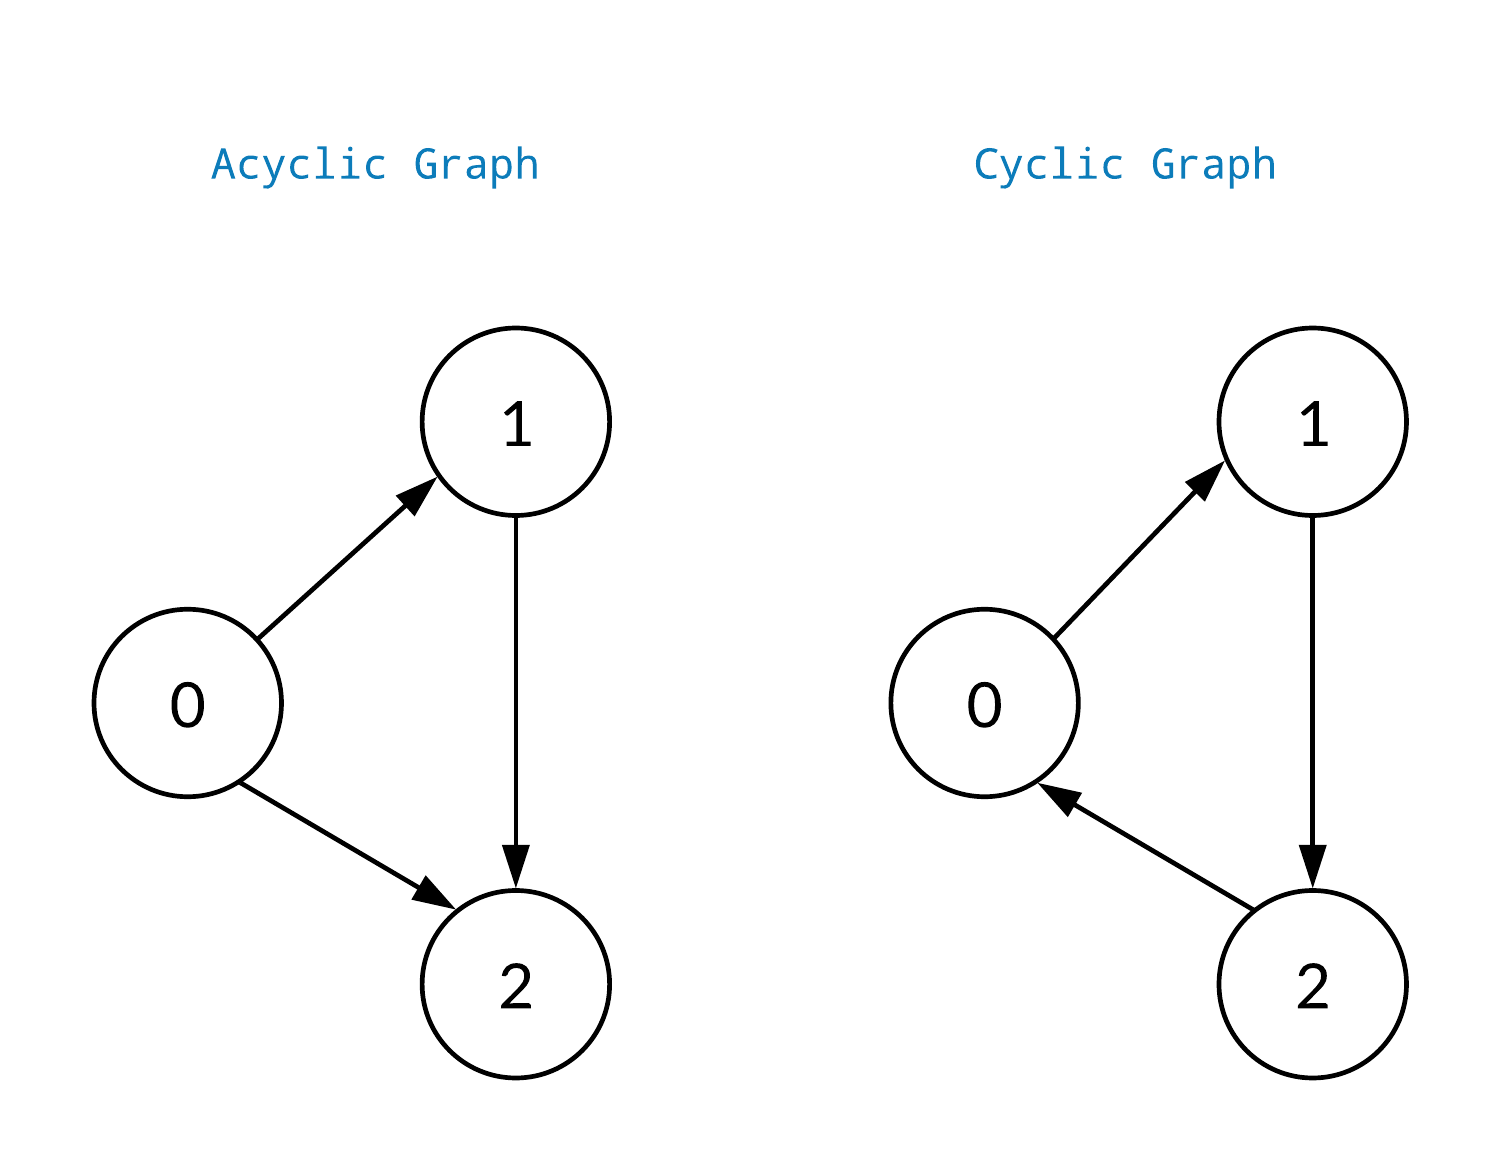 Image of comparison of acyclic and cyclic graph|500